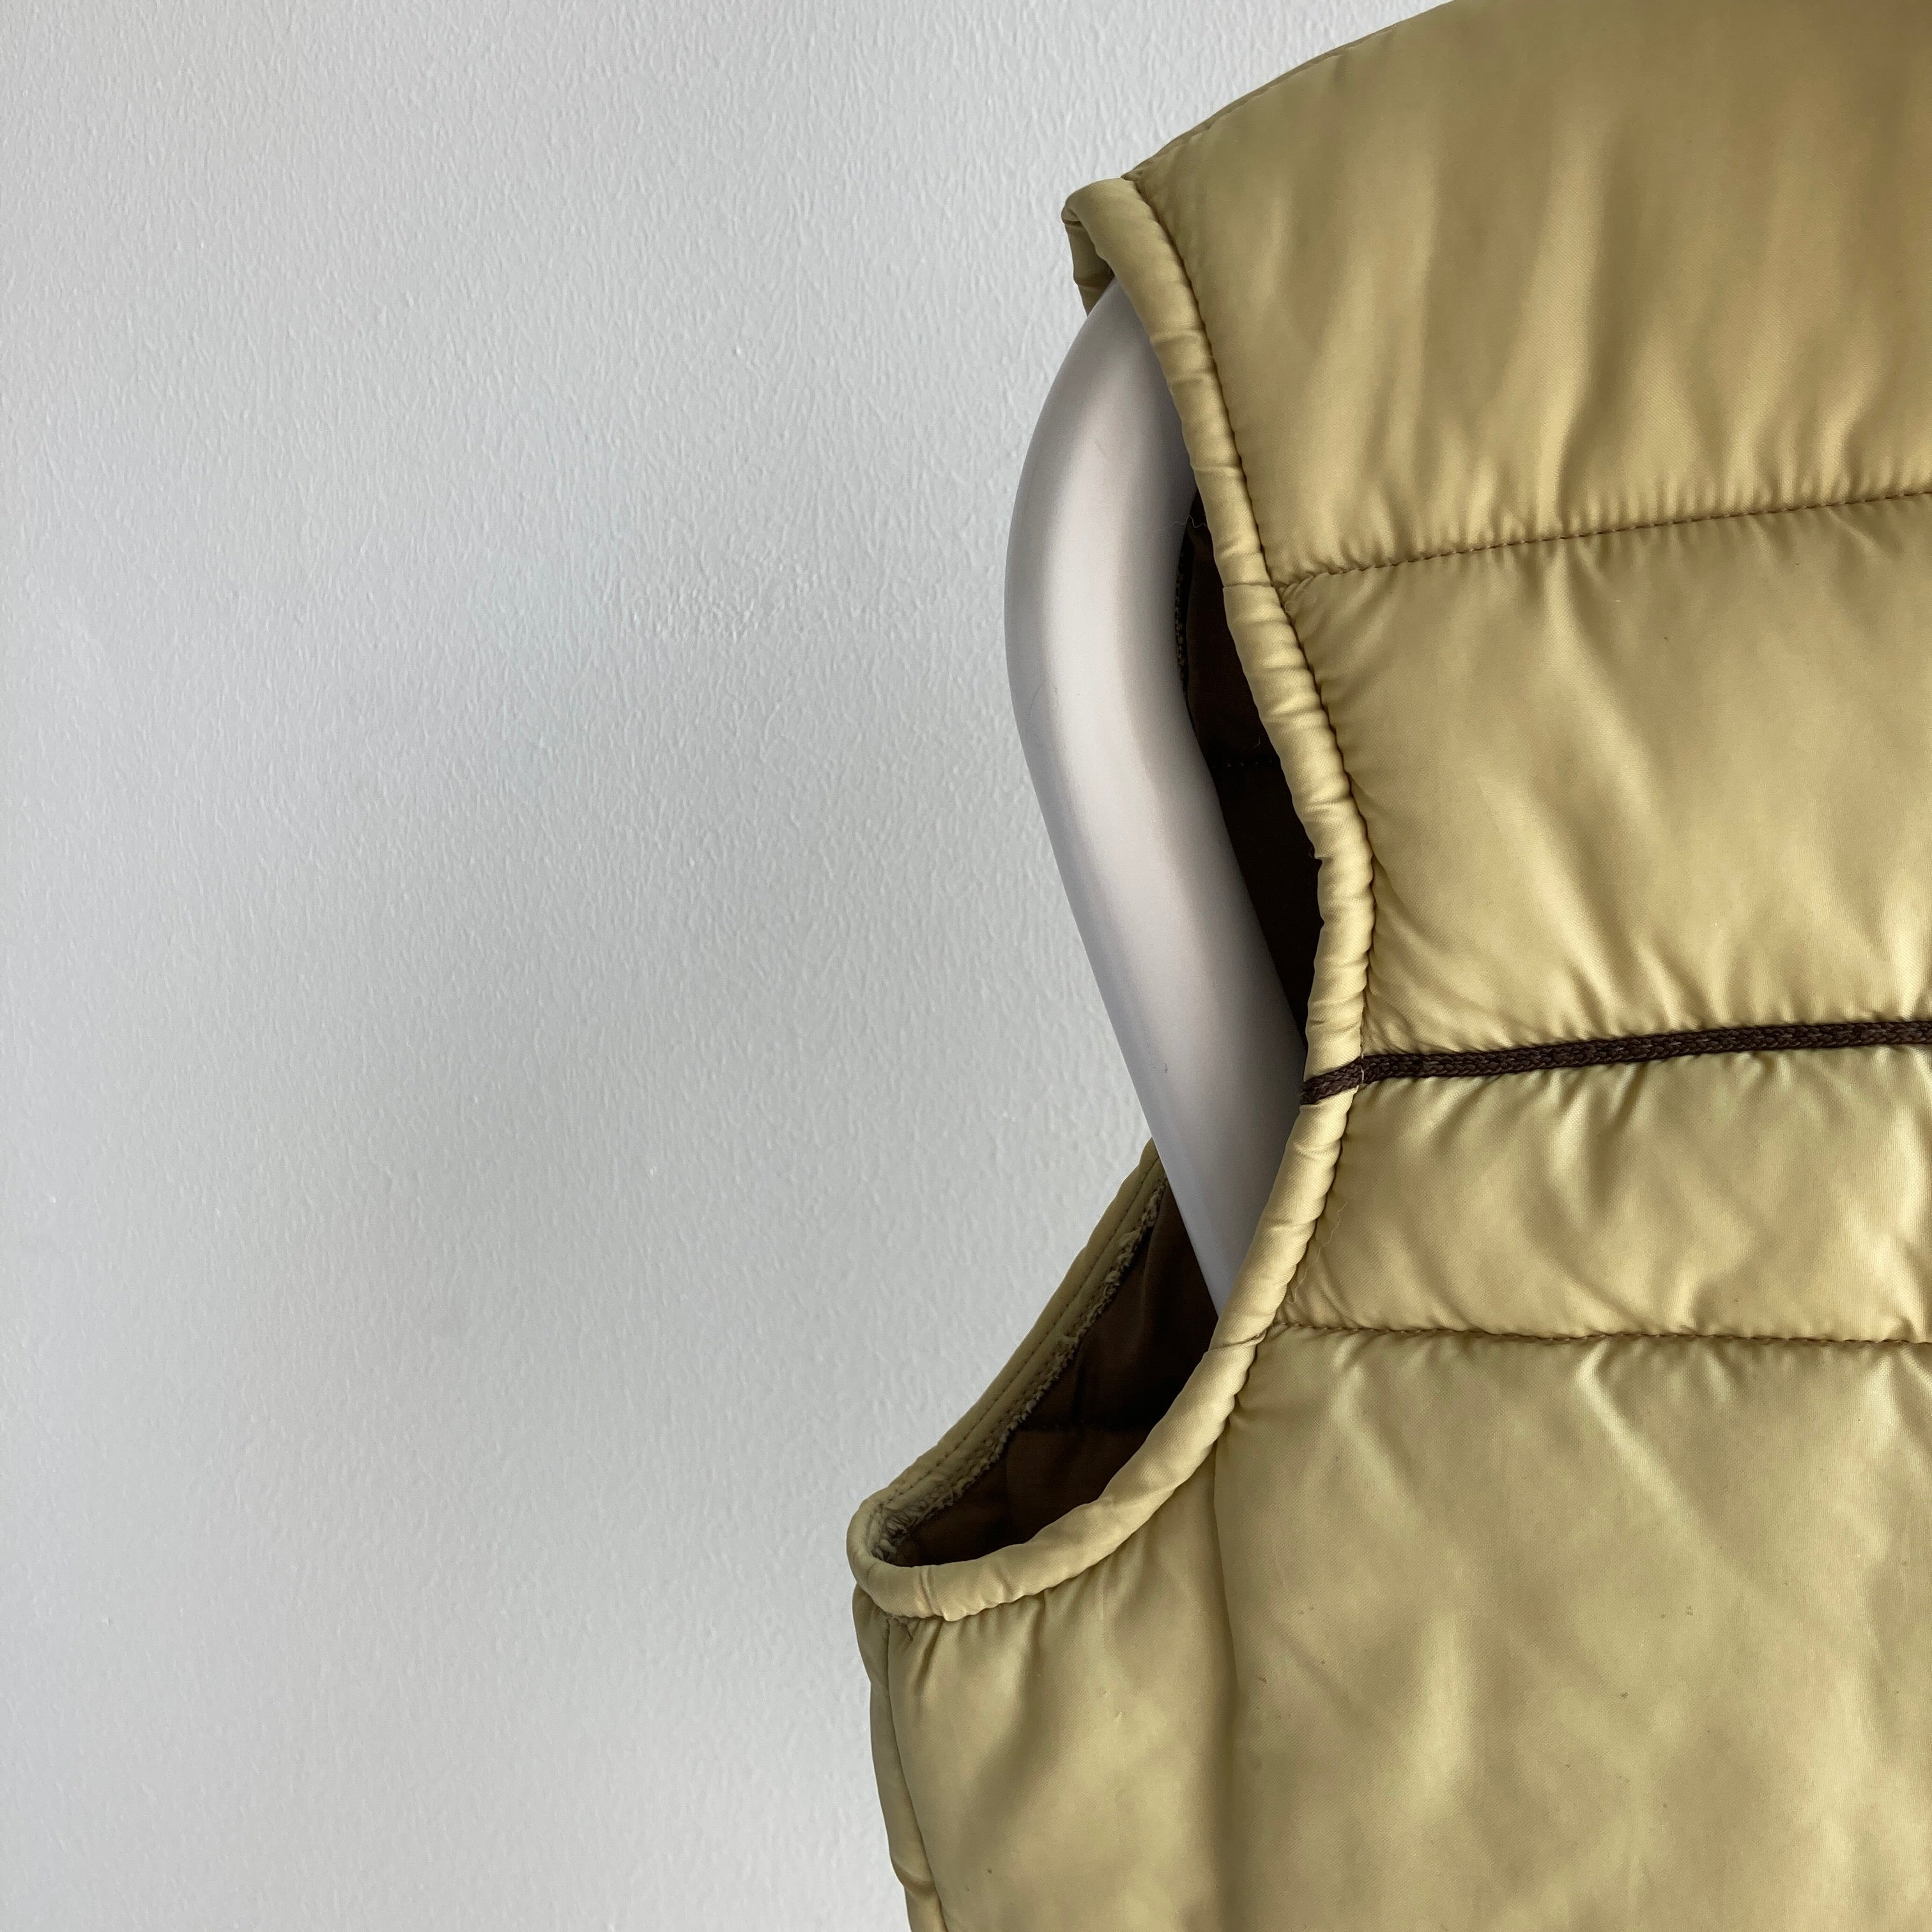 1970's/80's Puffer Vest With Contrast Piping